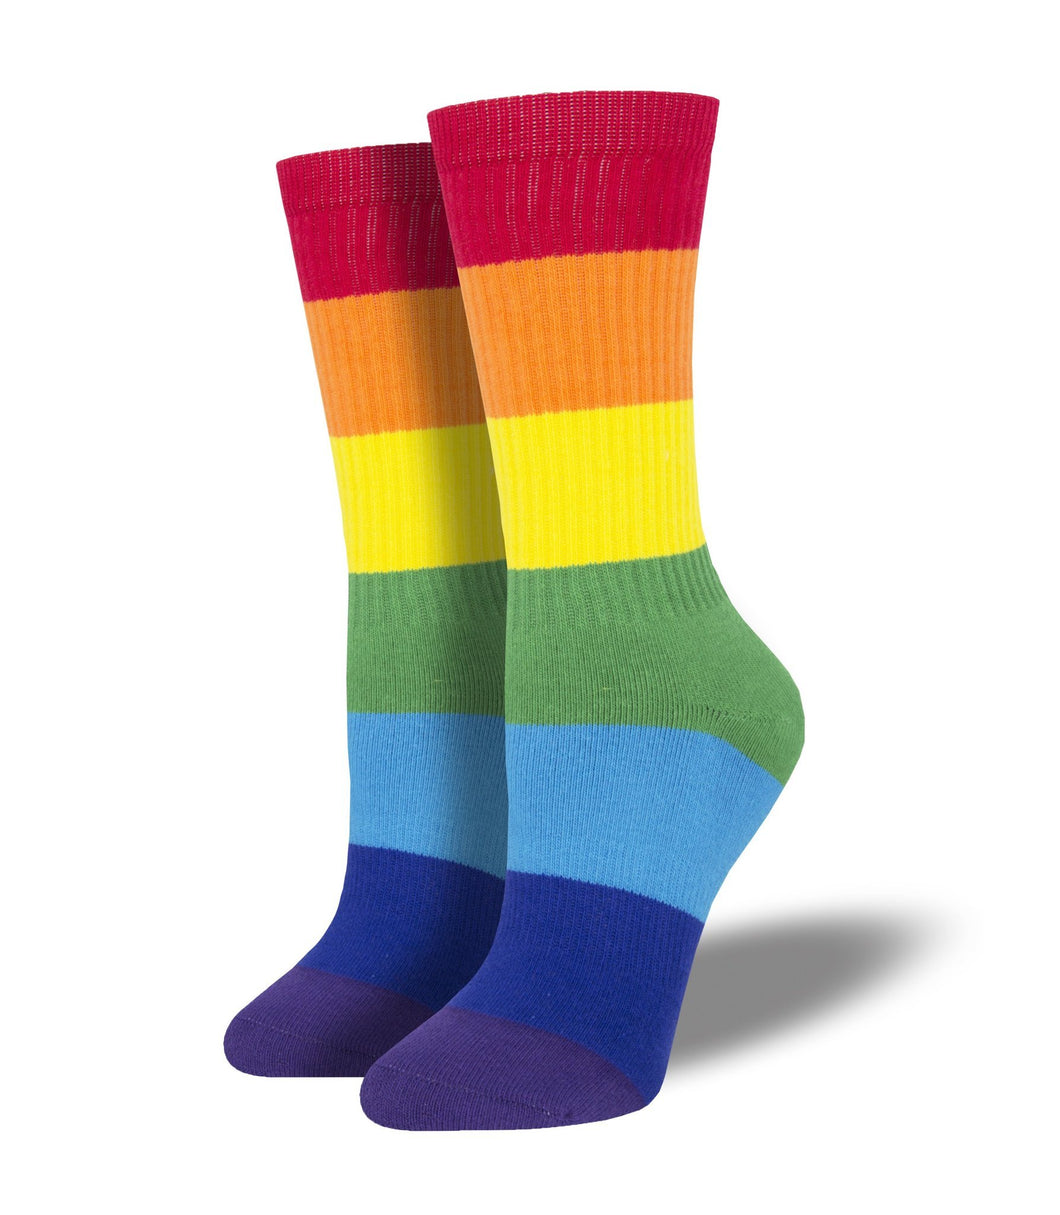 Gay Pride socks: A pair of rainbow Pride socks, which are striped horizontally in the classic Pride colors. The colors start with red at the shins, and goes purple at the toes.